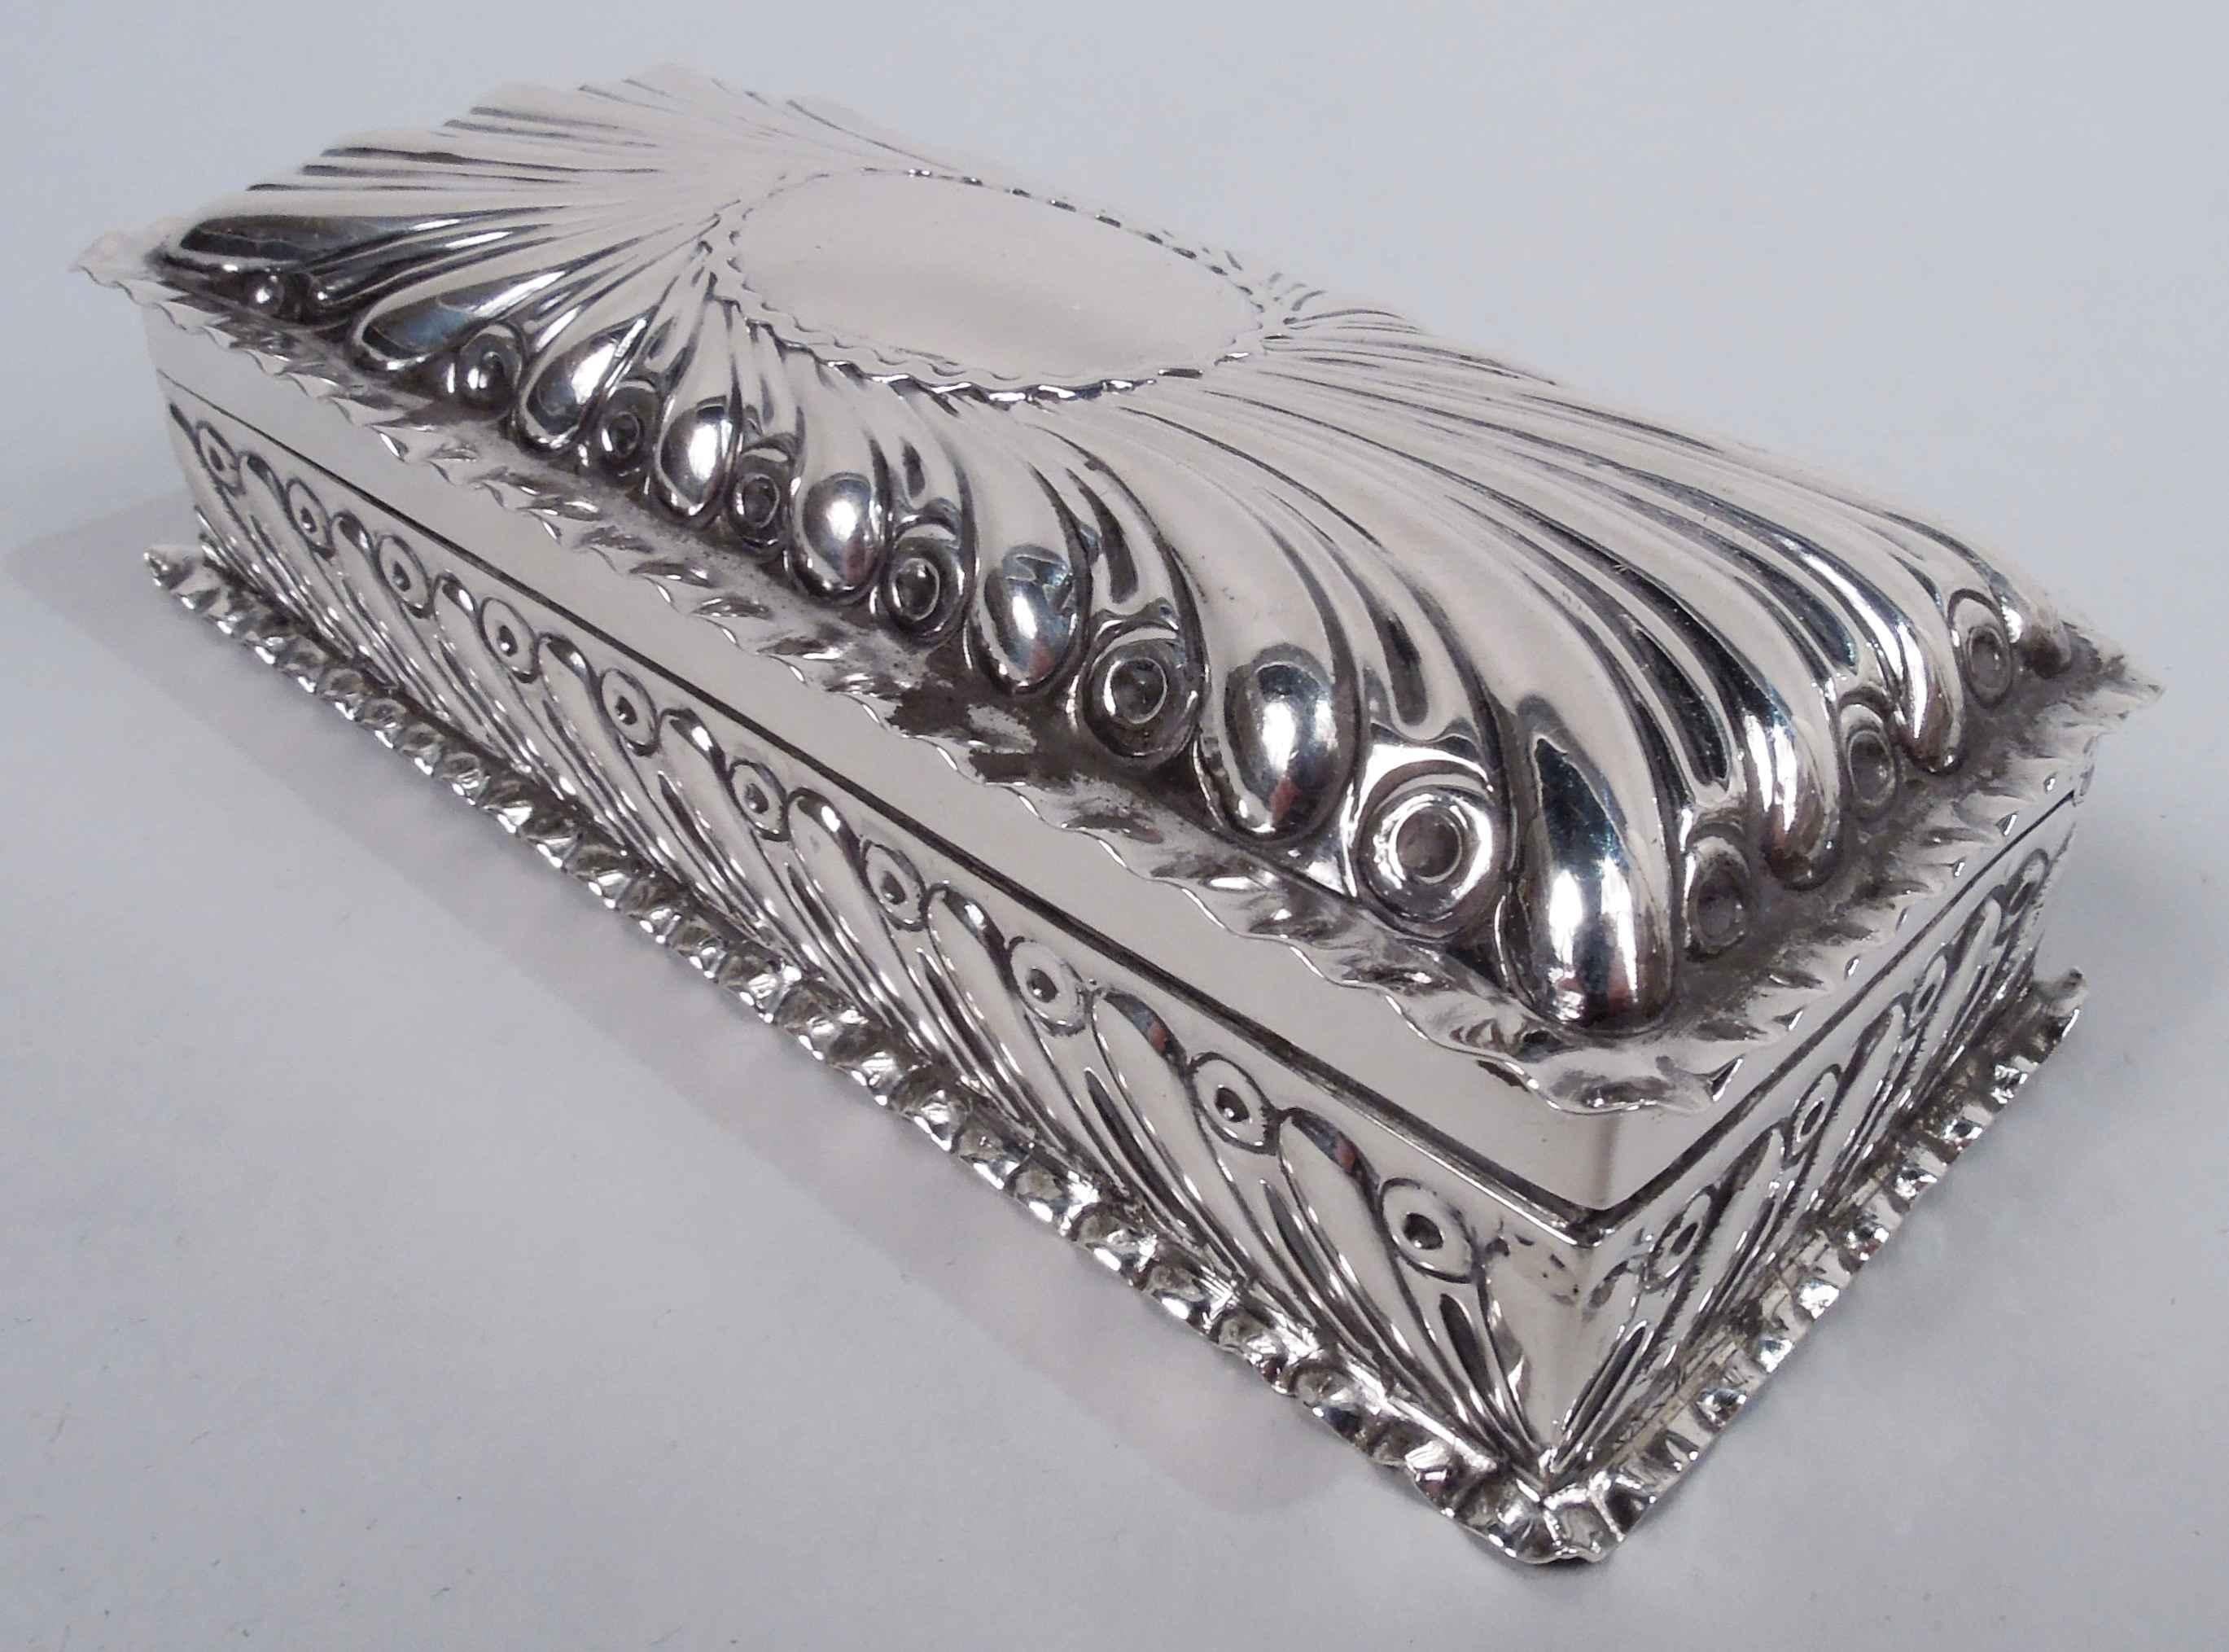 Victorian Classical sterling silver trinket box. Made by William Comyns in London in 1891. Rectangular with straight sides; cover hinged with curved top. Chased gadrooning. Cover top has central oval (vacant) with wavy border. Crimped cover and base